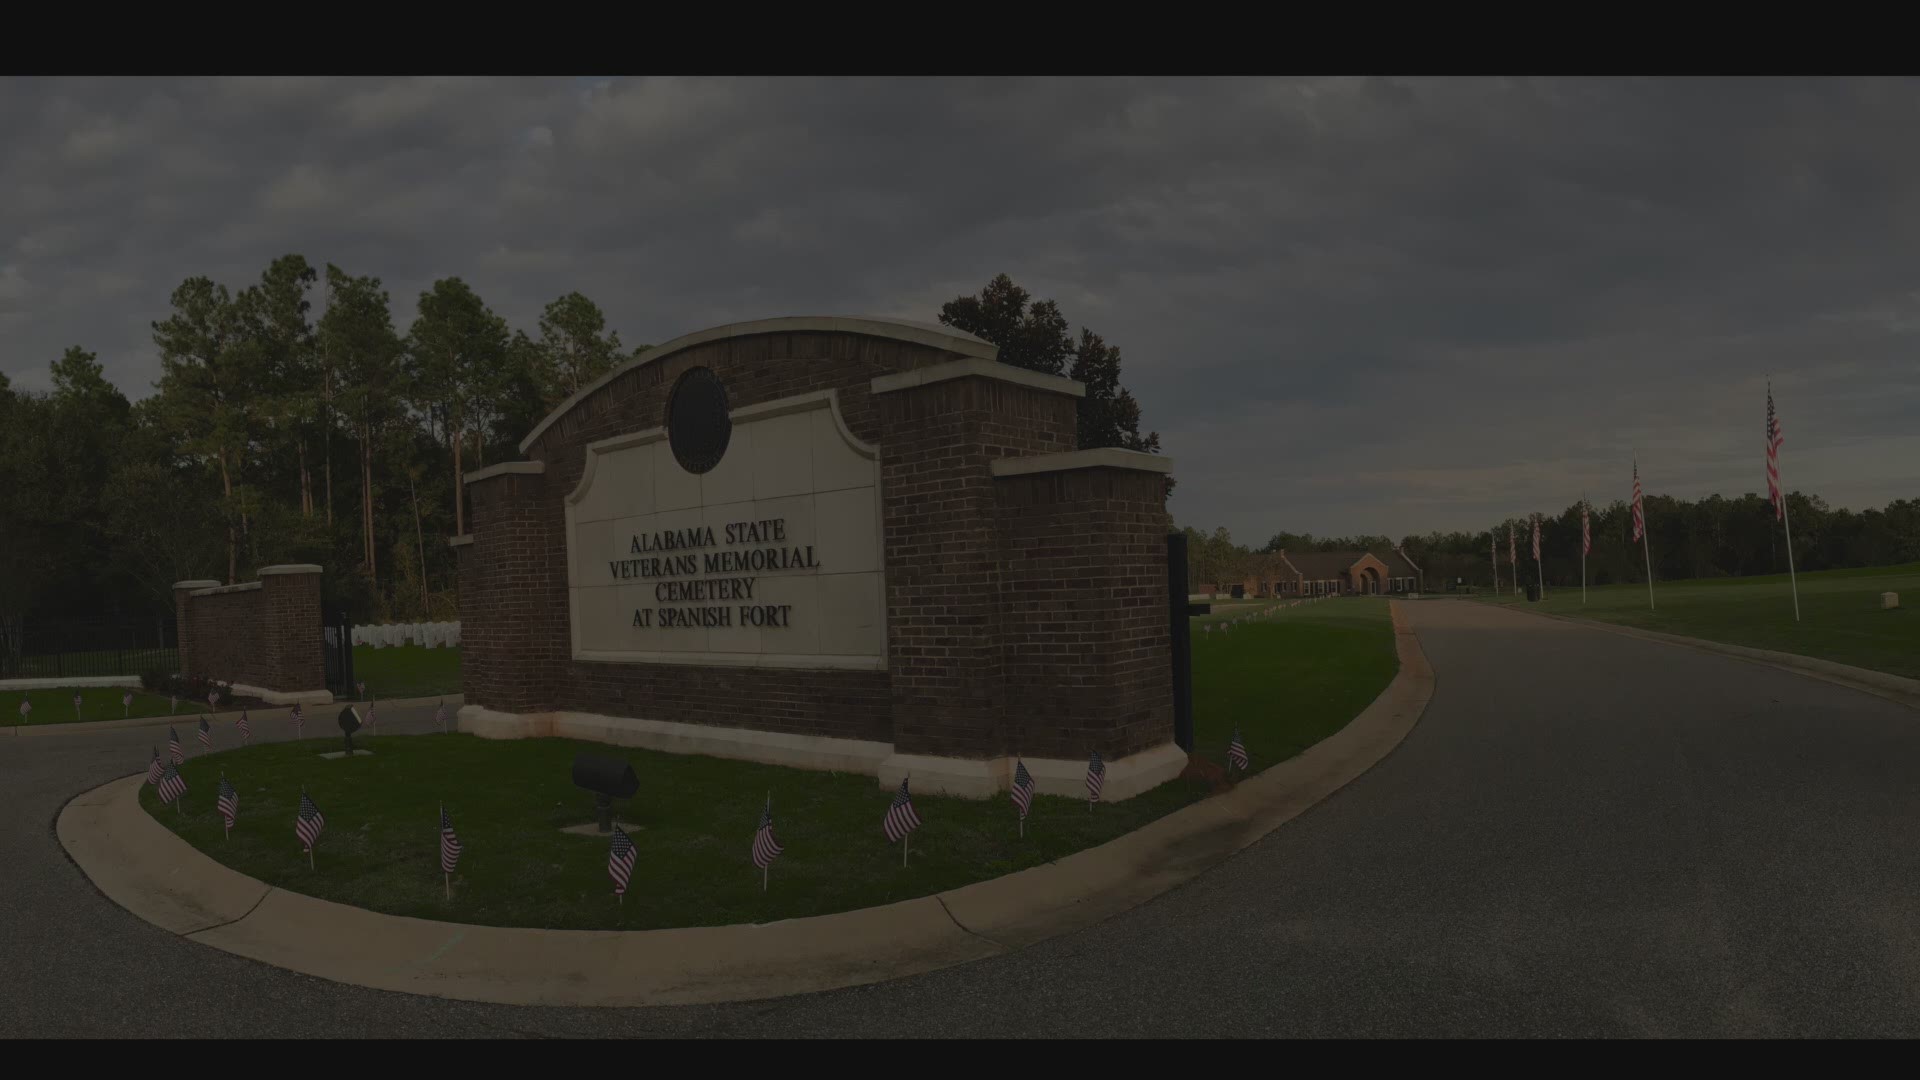 The Alabama Dept. of Veterans Affairs honored military dead with a #VirtualMemorialDay tribute.